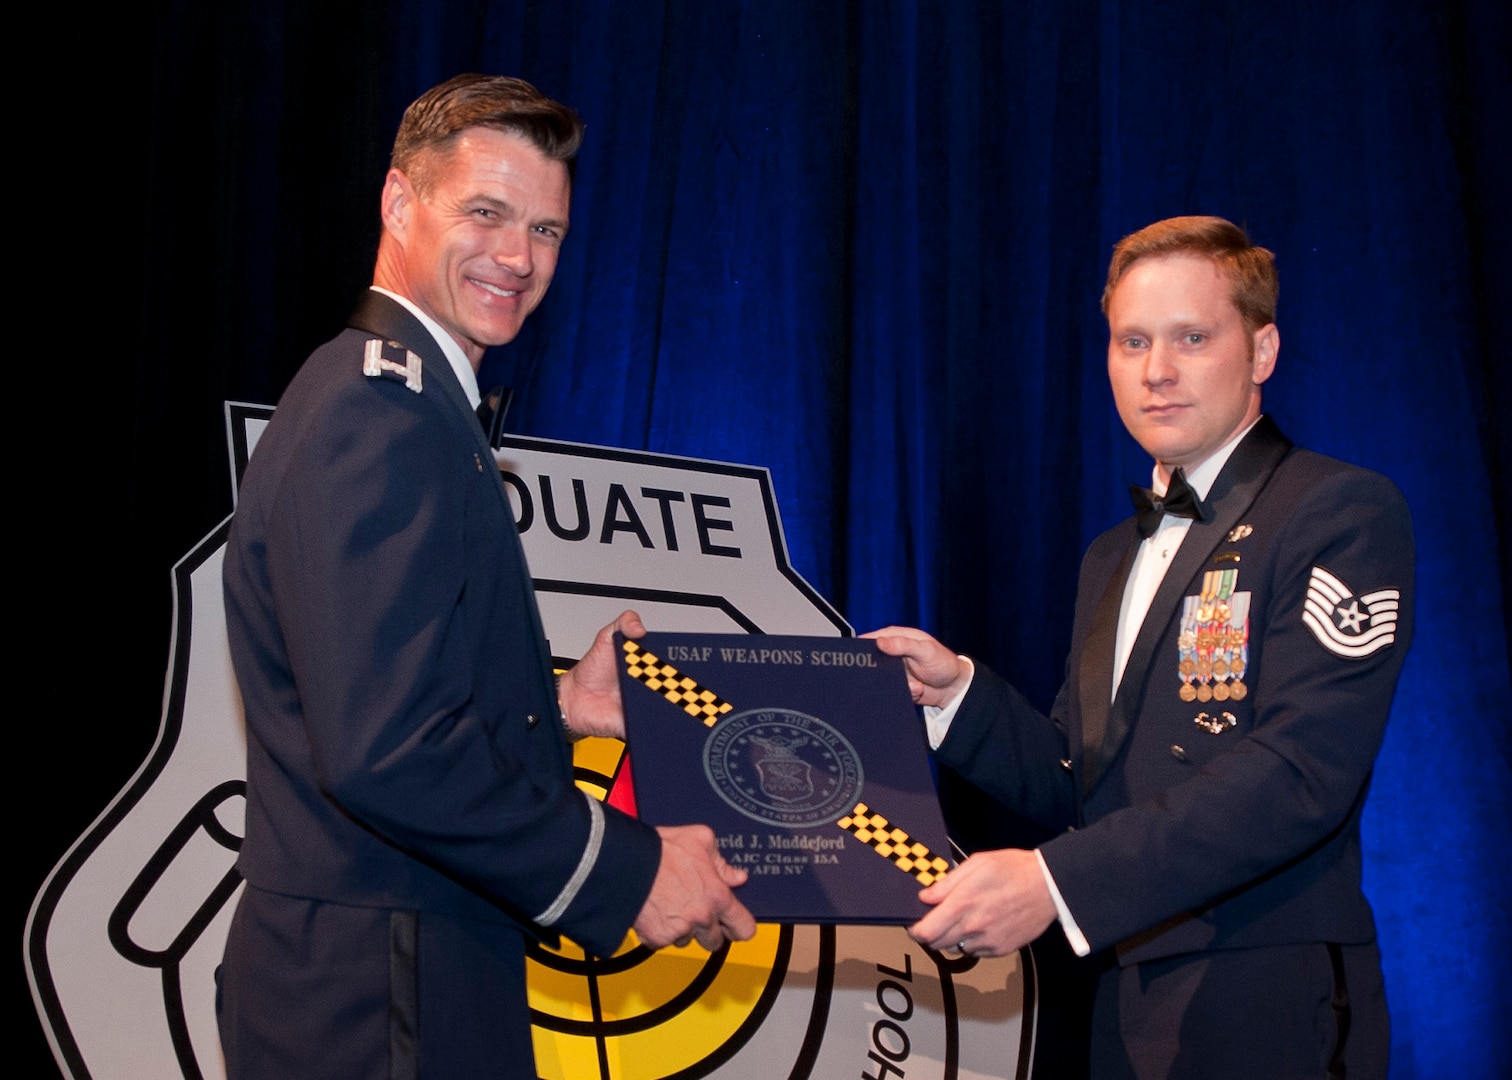 U.S. Air Force Tech. Sgt. David Maddeford receives his Weapons School diploma from Col. Michael Drowley, Commandant, for USAF Weapons School, during a ceremony held June 27, 2015, in Las Vegas. Maddeford, a Joint Terminal Attack Controller (JTAC) with the 118th Air Support Operations Squadron, New London, North Carolina, was also one of five enlisted JTACs who made history by being the first enlisted graduates awarded the coveted graduate patch and enter into an elite group of “patch wearer” brethren.